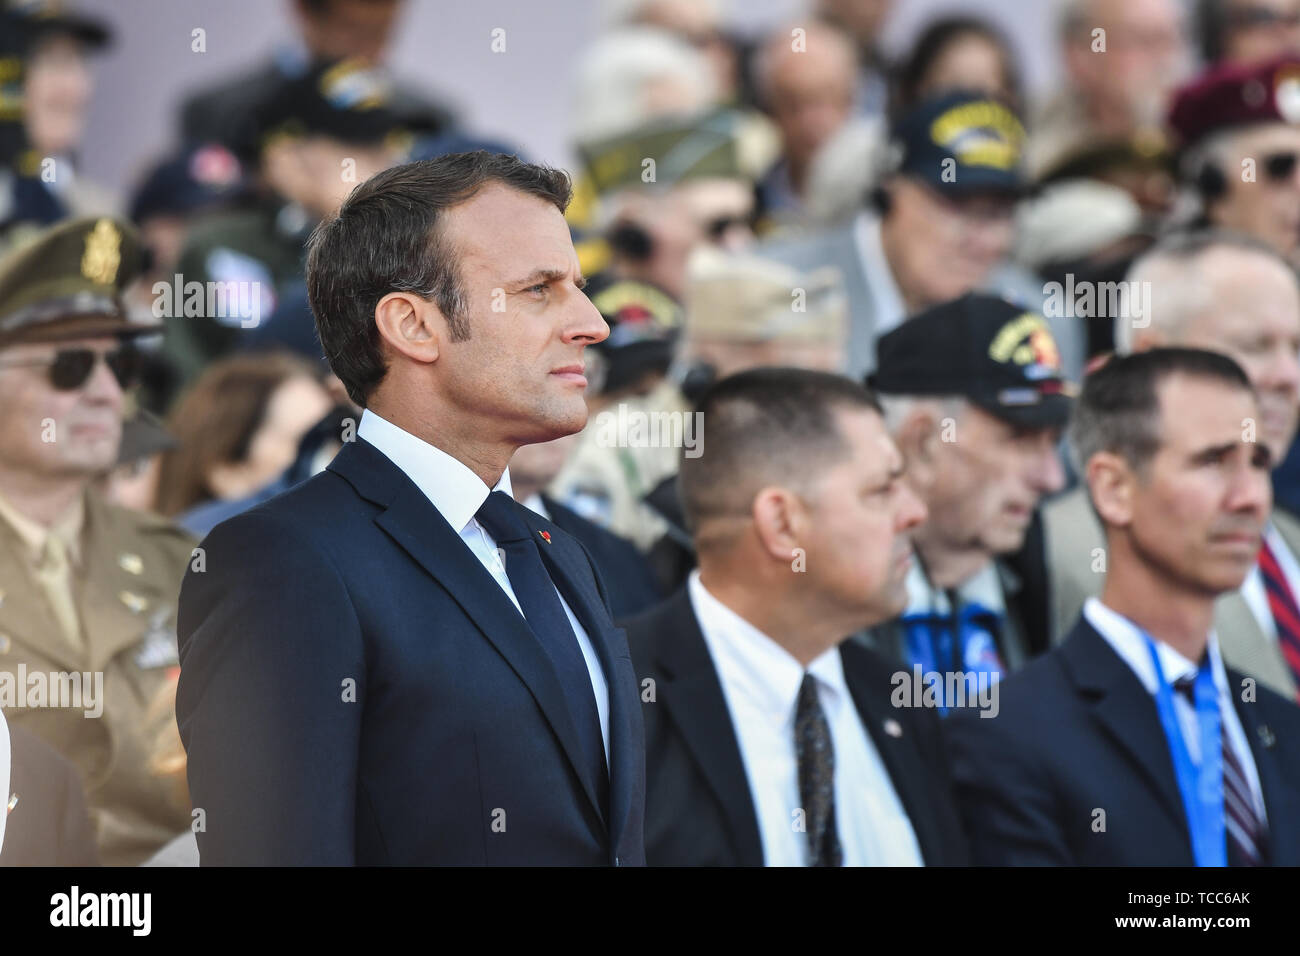 Colleville Sur Mer, France. 06th June, 2019. French President Emmanuel Macron during a commemoration ceremony marking the 75th D-Day Anniversary at the Normandy American Cemetery and Memorial June 6, 2019 in Colleville-sur-Mer, France. Thousands have converged on Normandy to commemorate the 75th anniversary of Operation Overlord, the WWII Allied invasion commonly known as D-Day. Credit: Planetpix/Alamy Live News Stock Photo